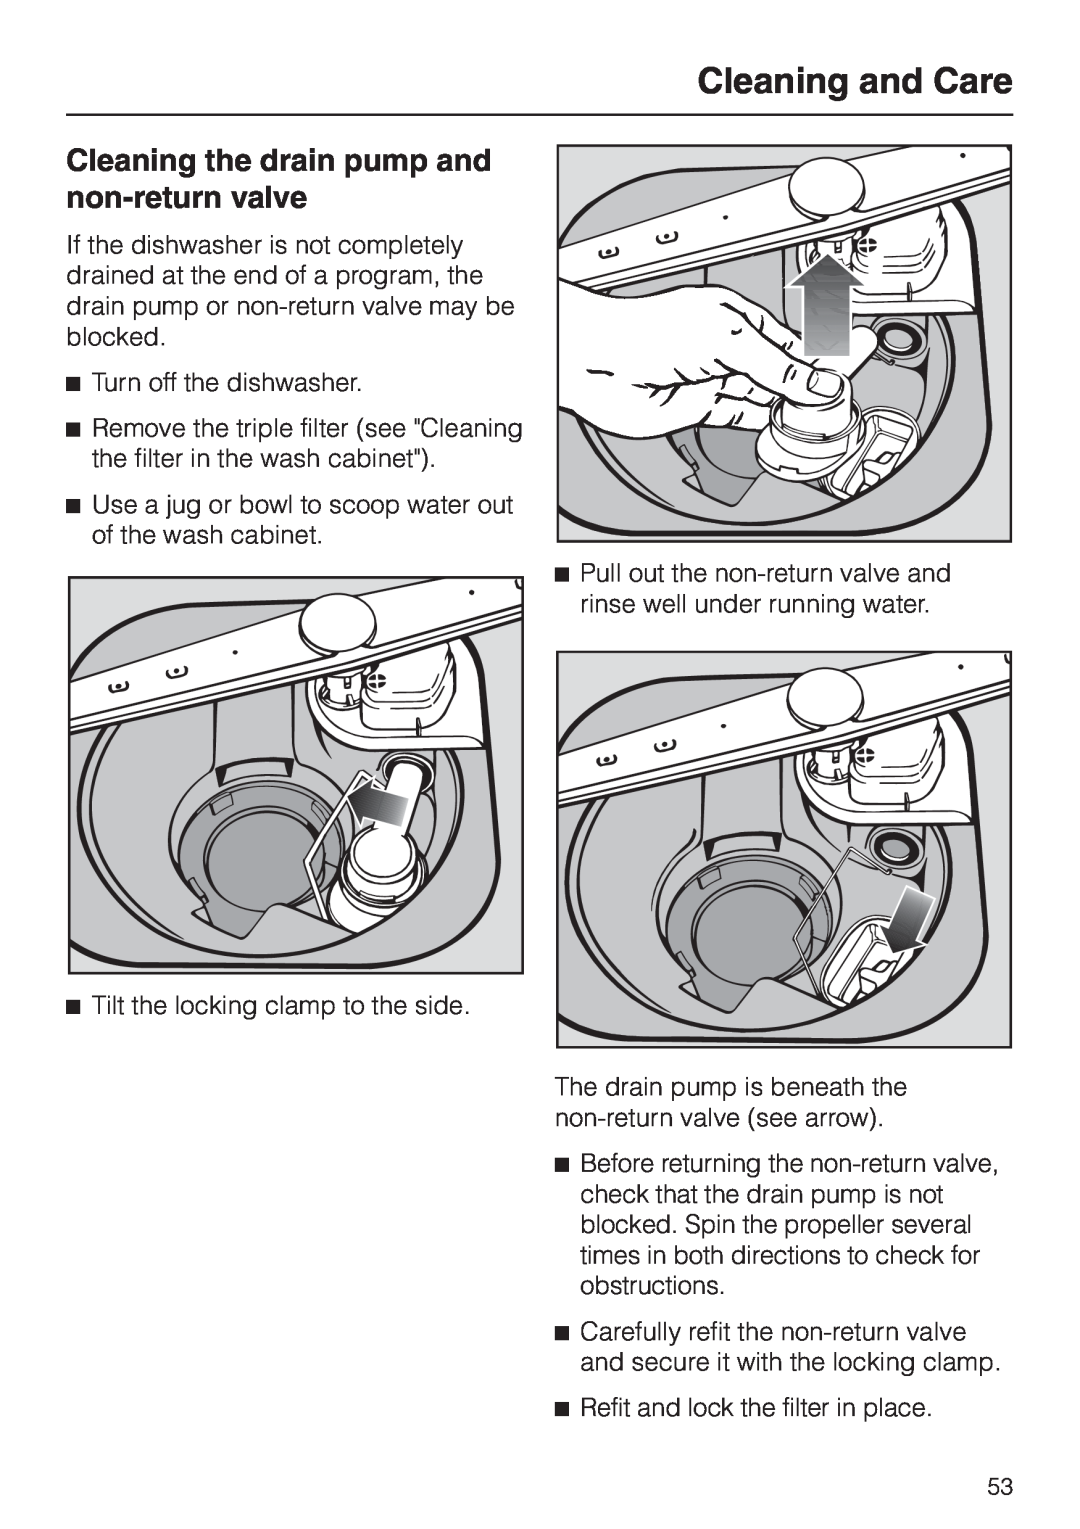 Miele HG01 operating instructions Cleaning the drain pump and non-returnvalve, Cleaning and Care 